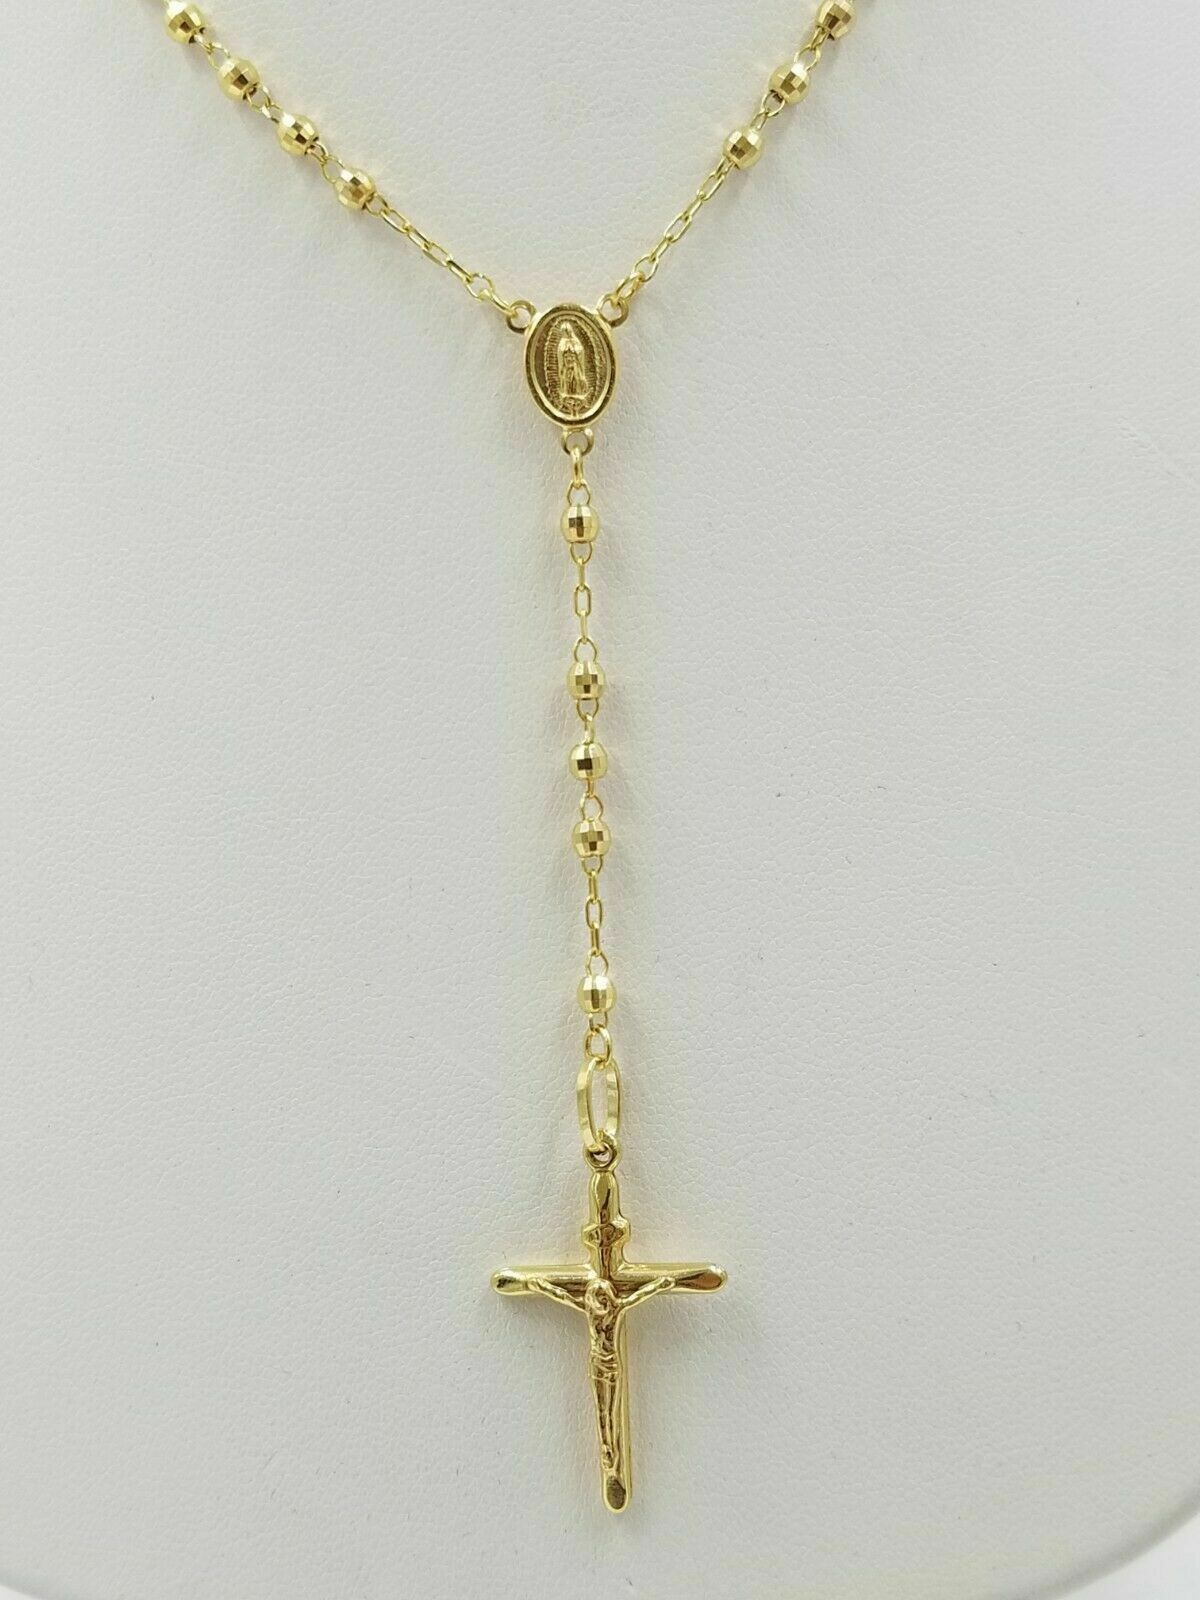 REAL 14KT Yellow Gold Rosary Necklace Ladies 24" Virgin Mary Jesus Cross Chain